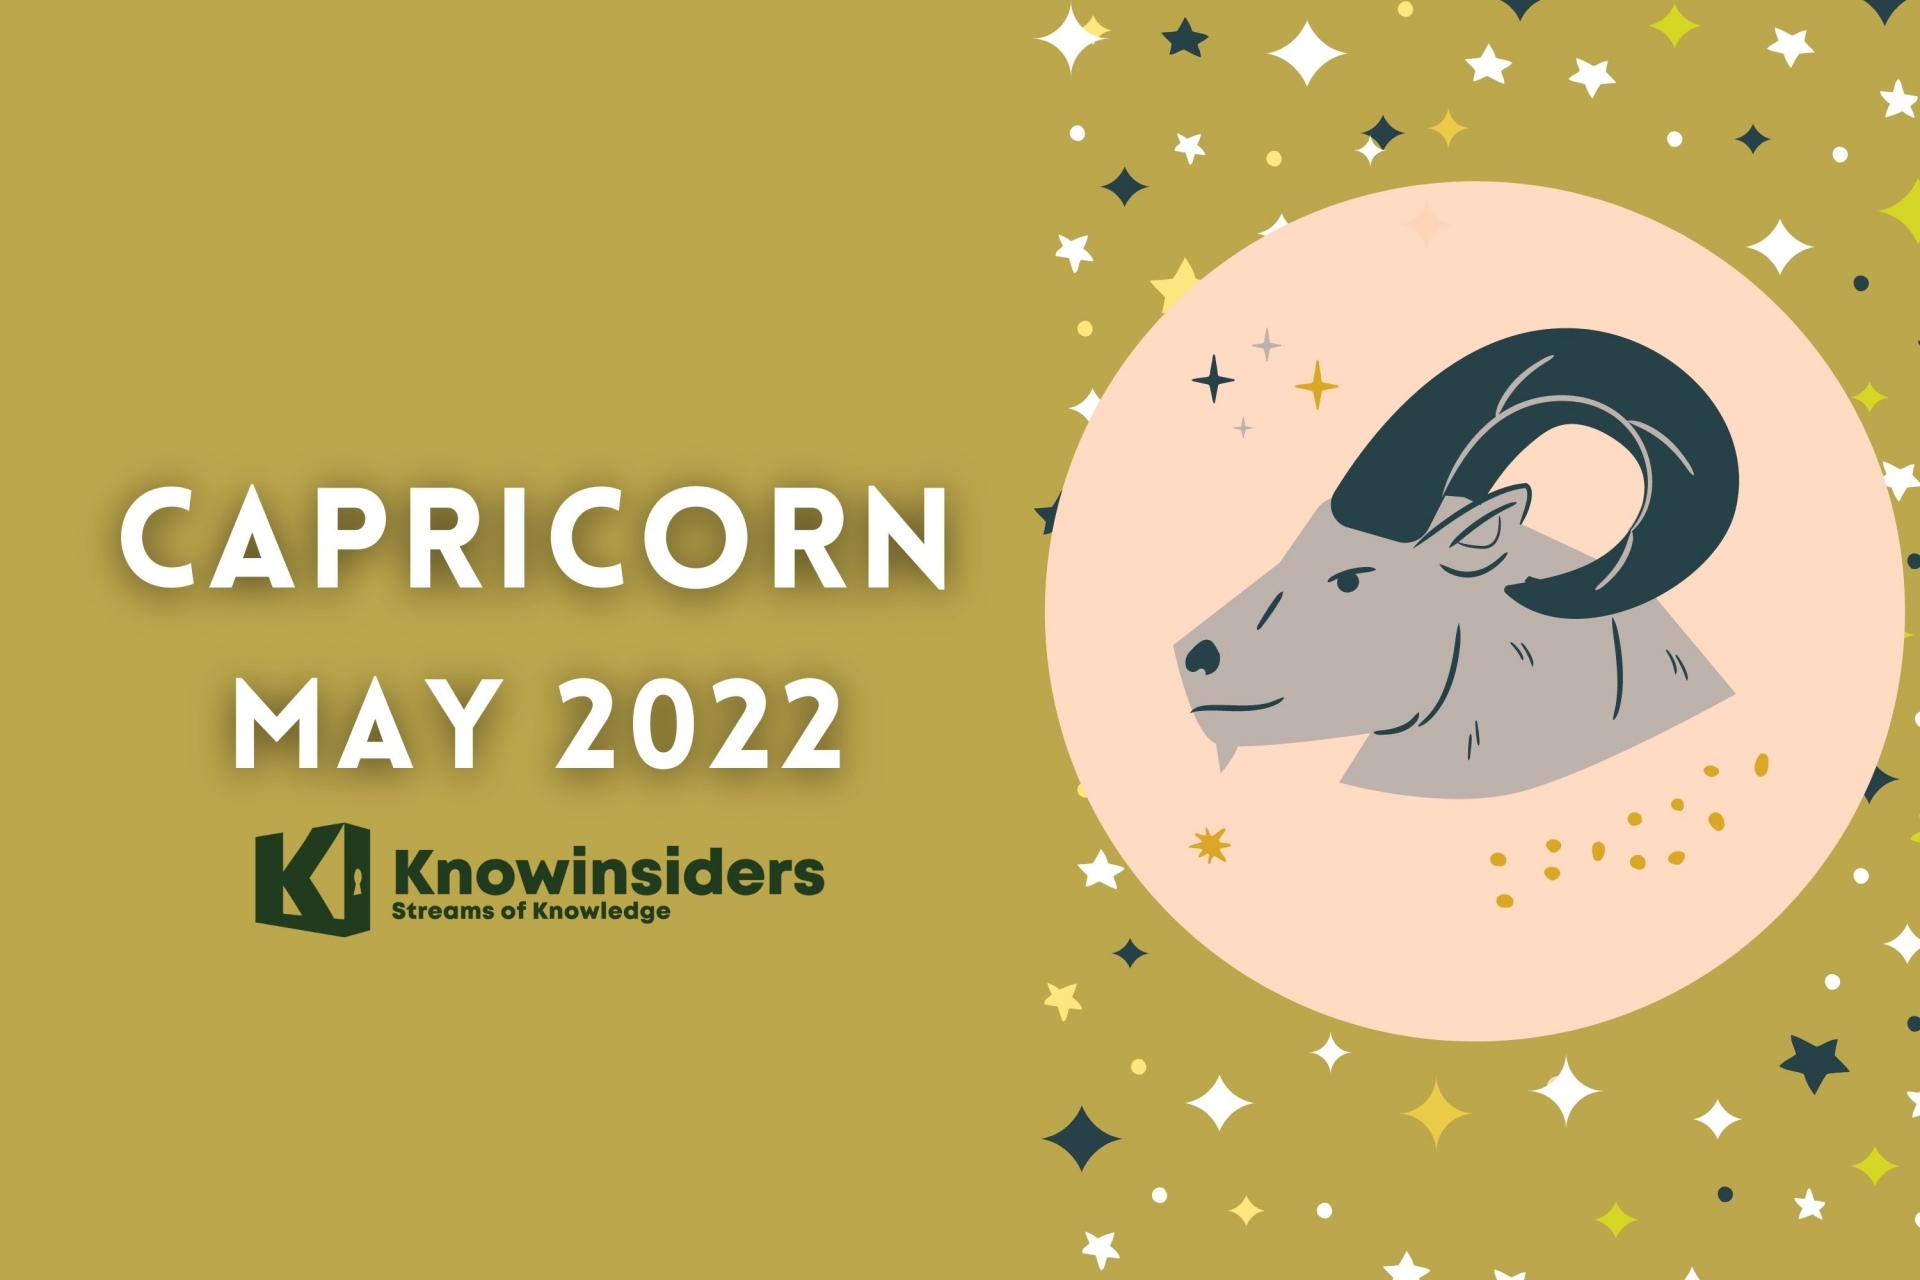 CAPRICORN May 2022 Horoscope: Monthly Prediction for Love, Career, Money and Health